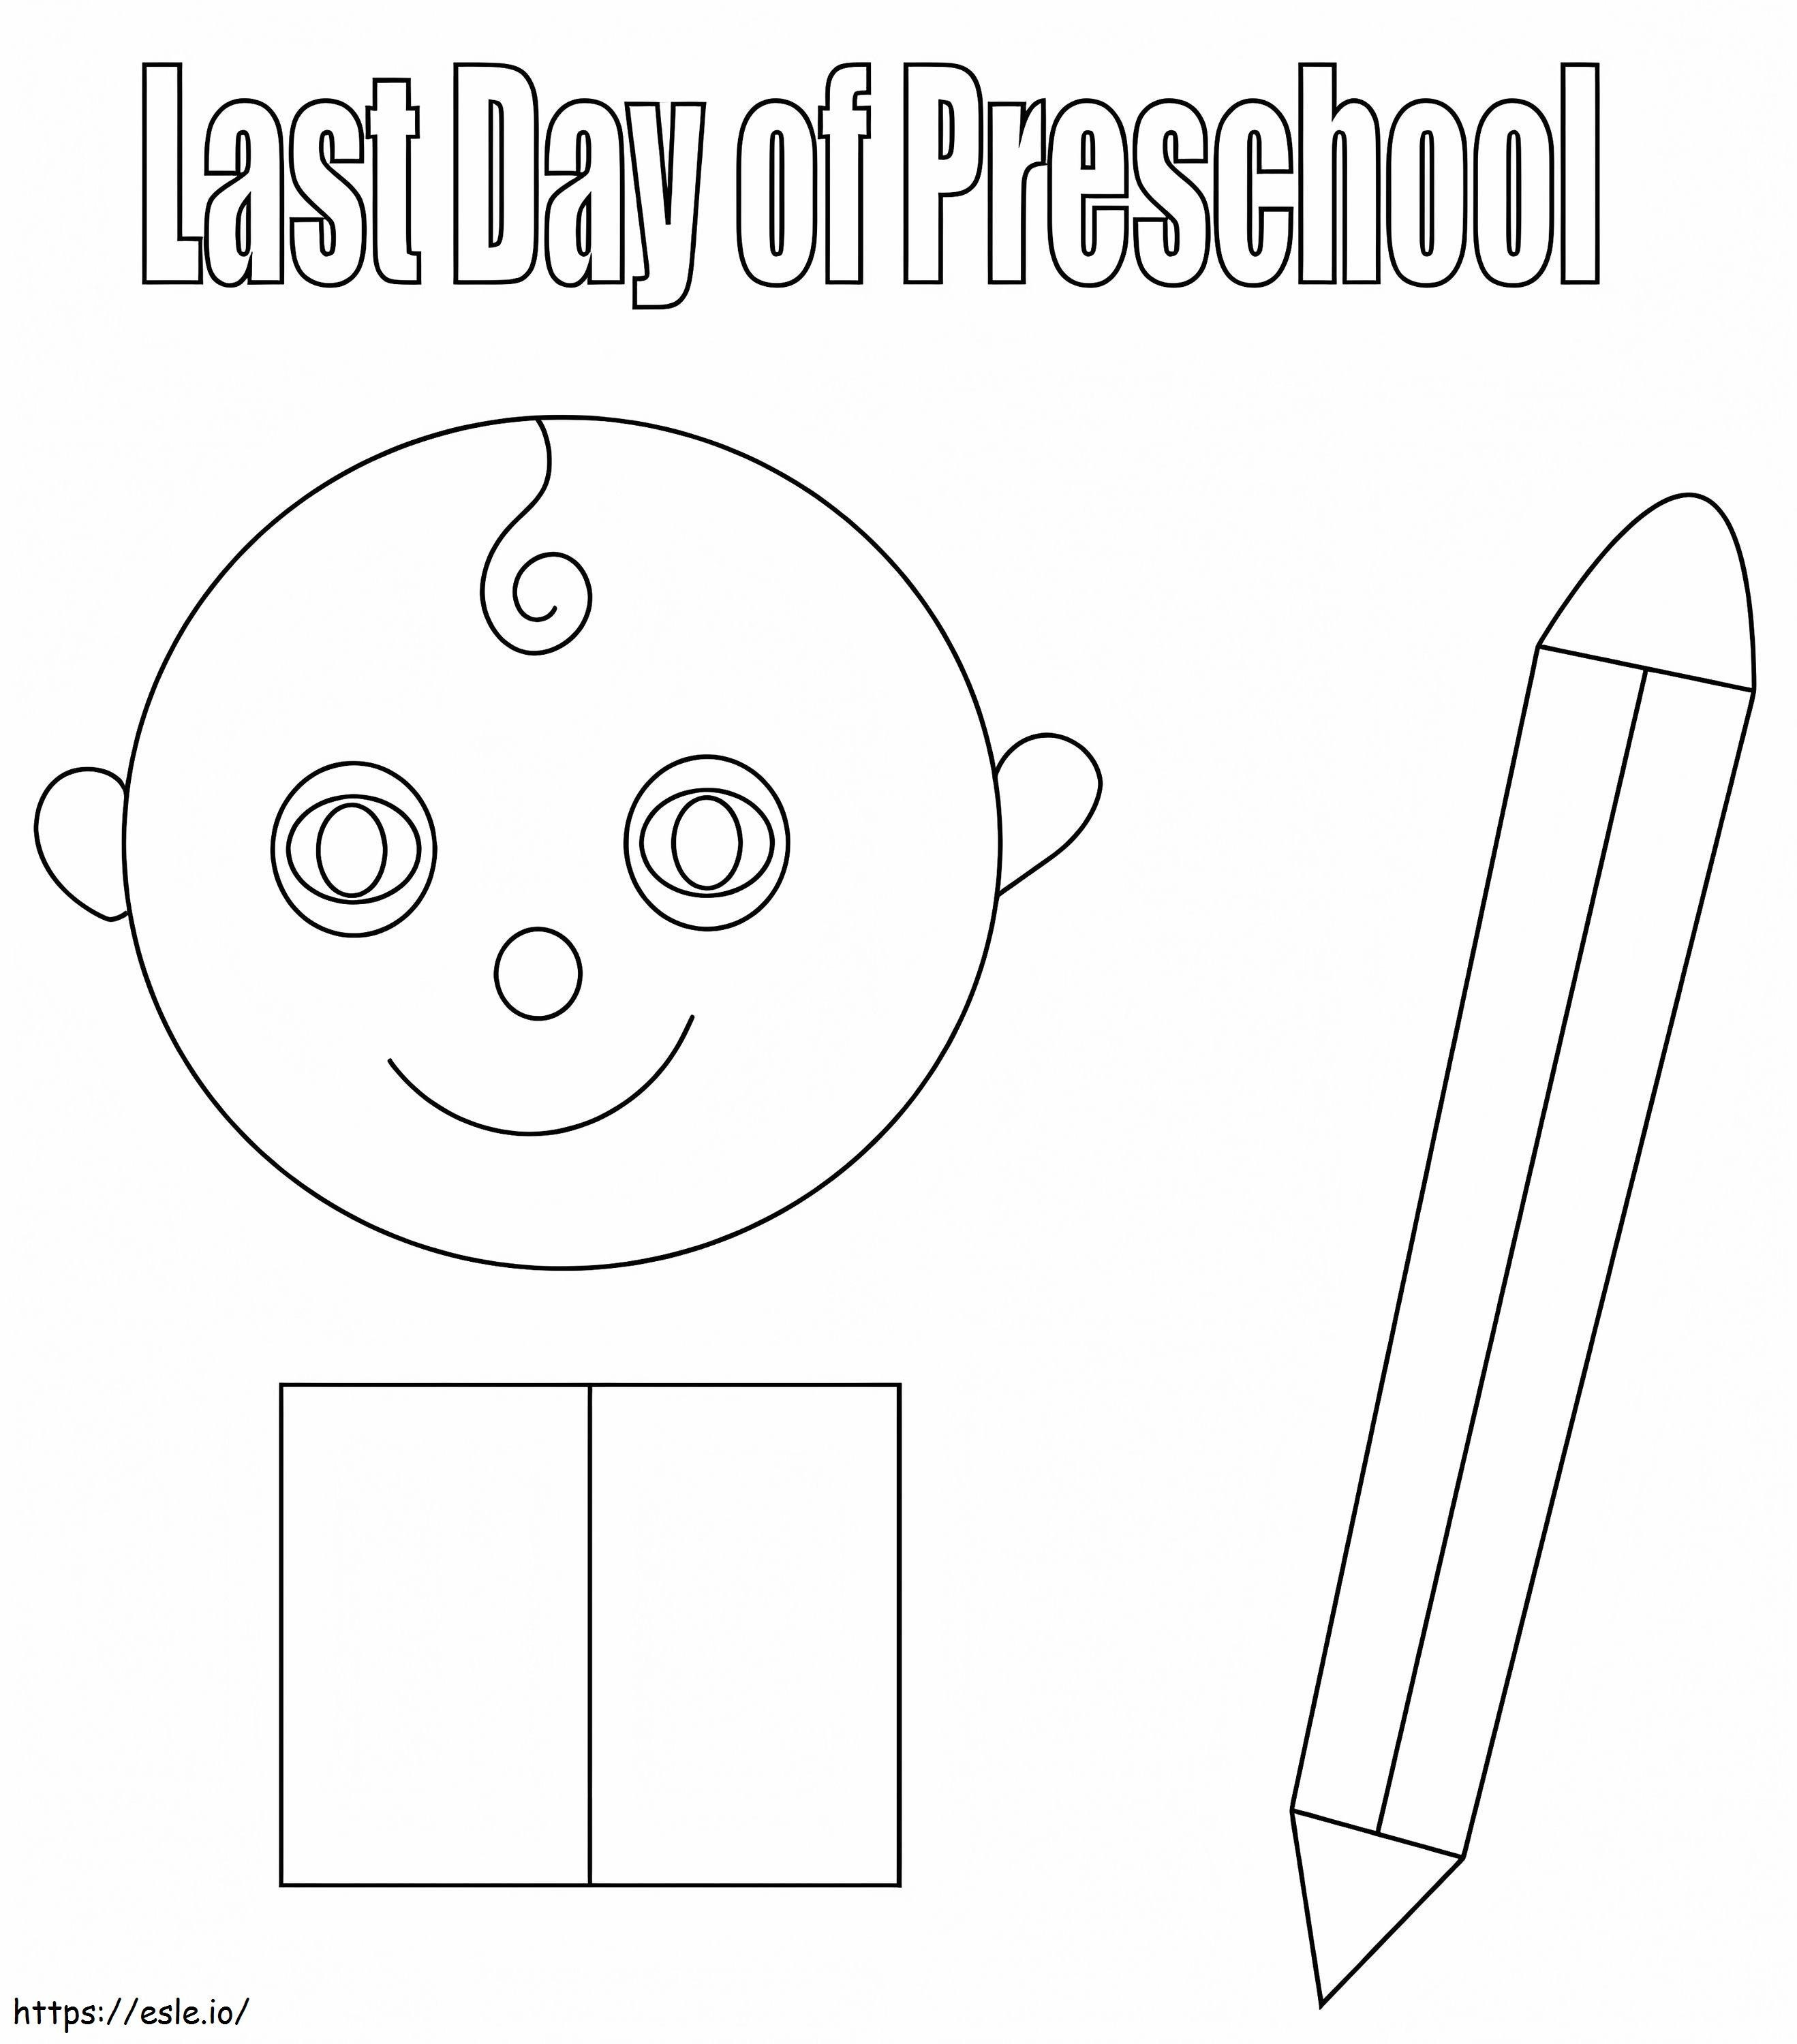 My Last Day Of Preschool coloring page